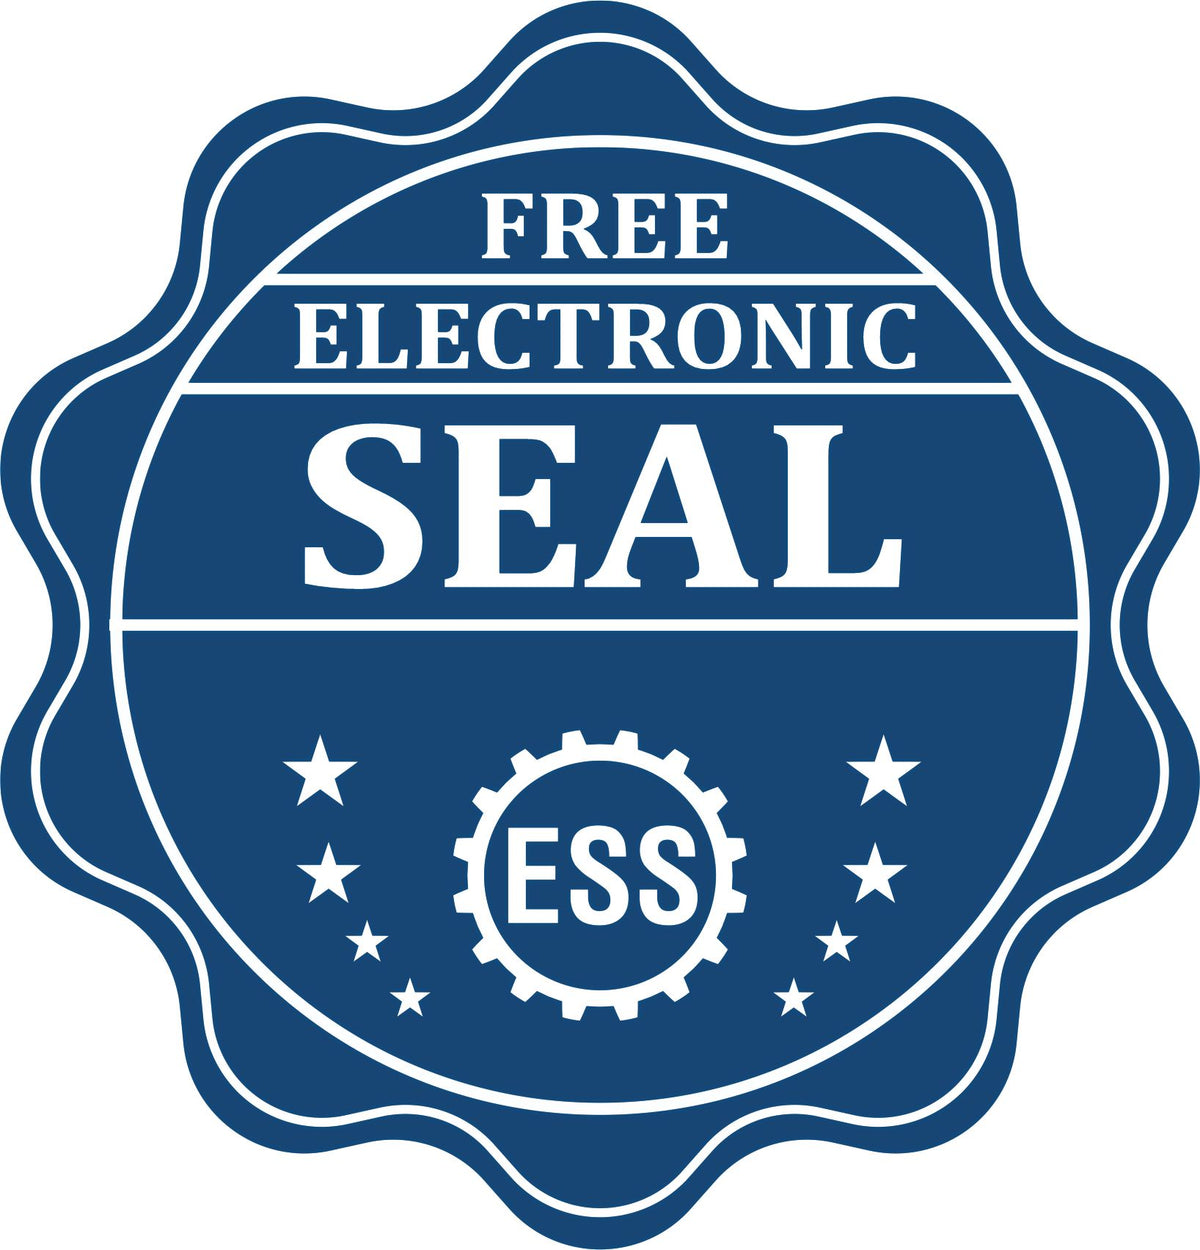 A badge showing a free electronic seal for the Heavy Duty Cast Iron Kansas Engineer Seal Embosser with stars and the ESS gear on the emblem.